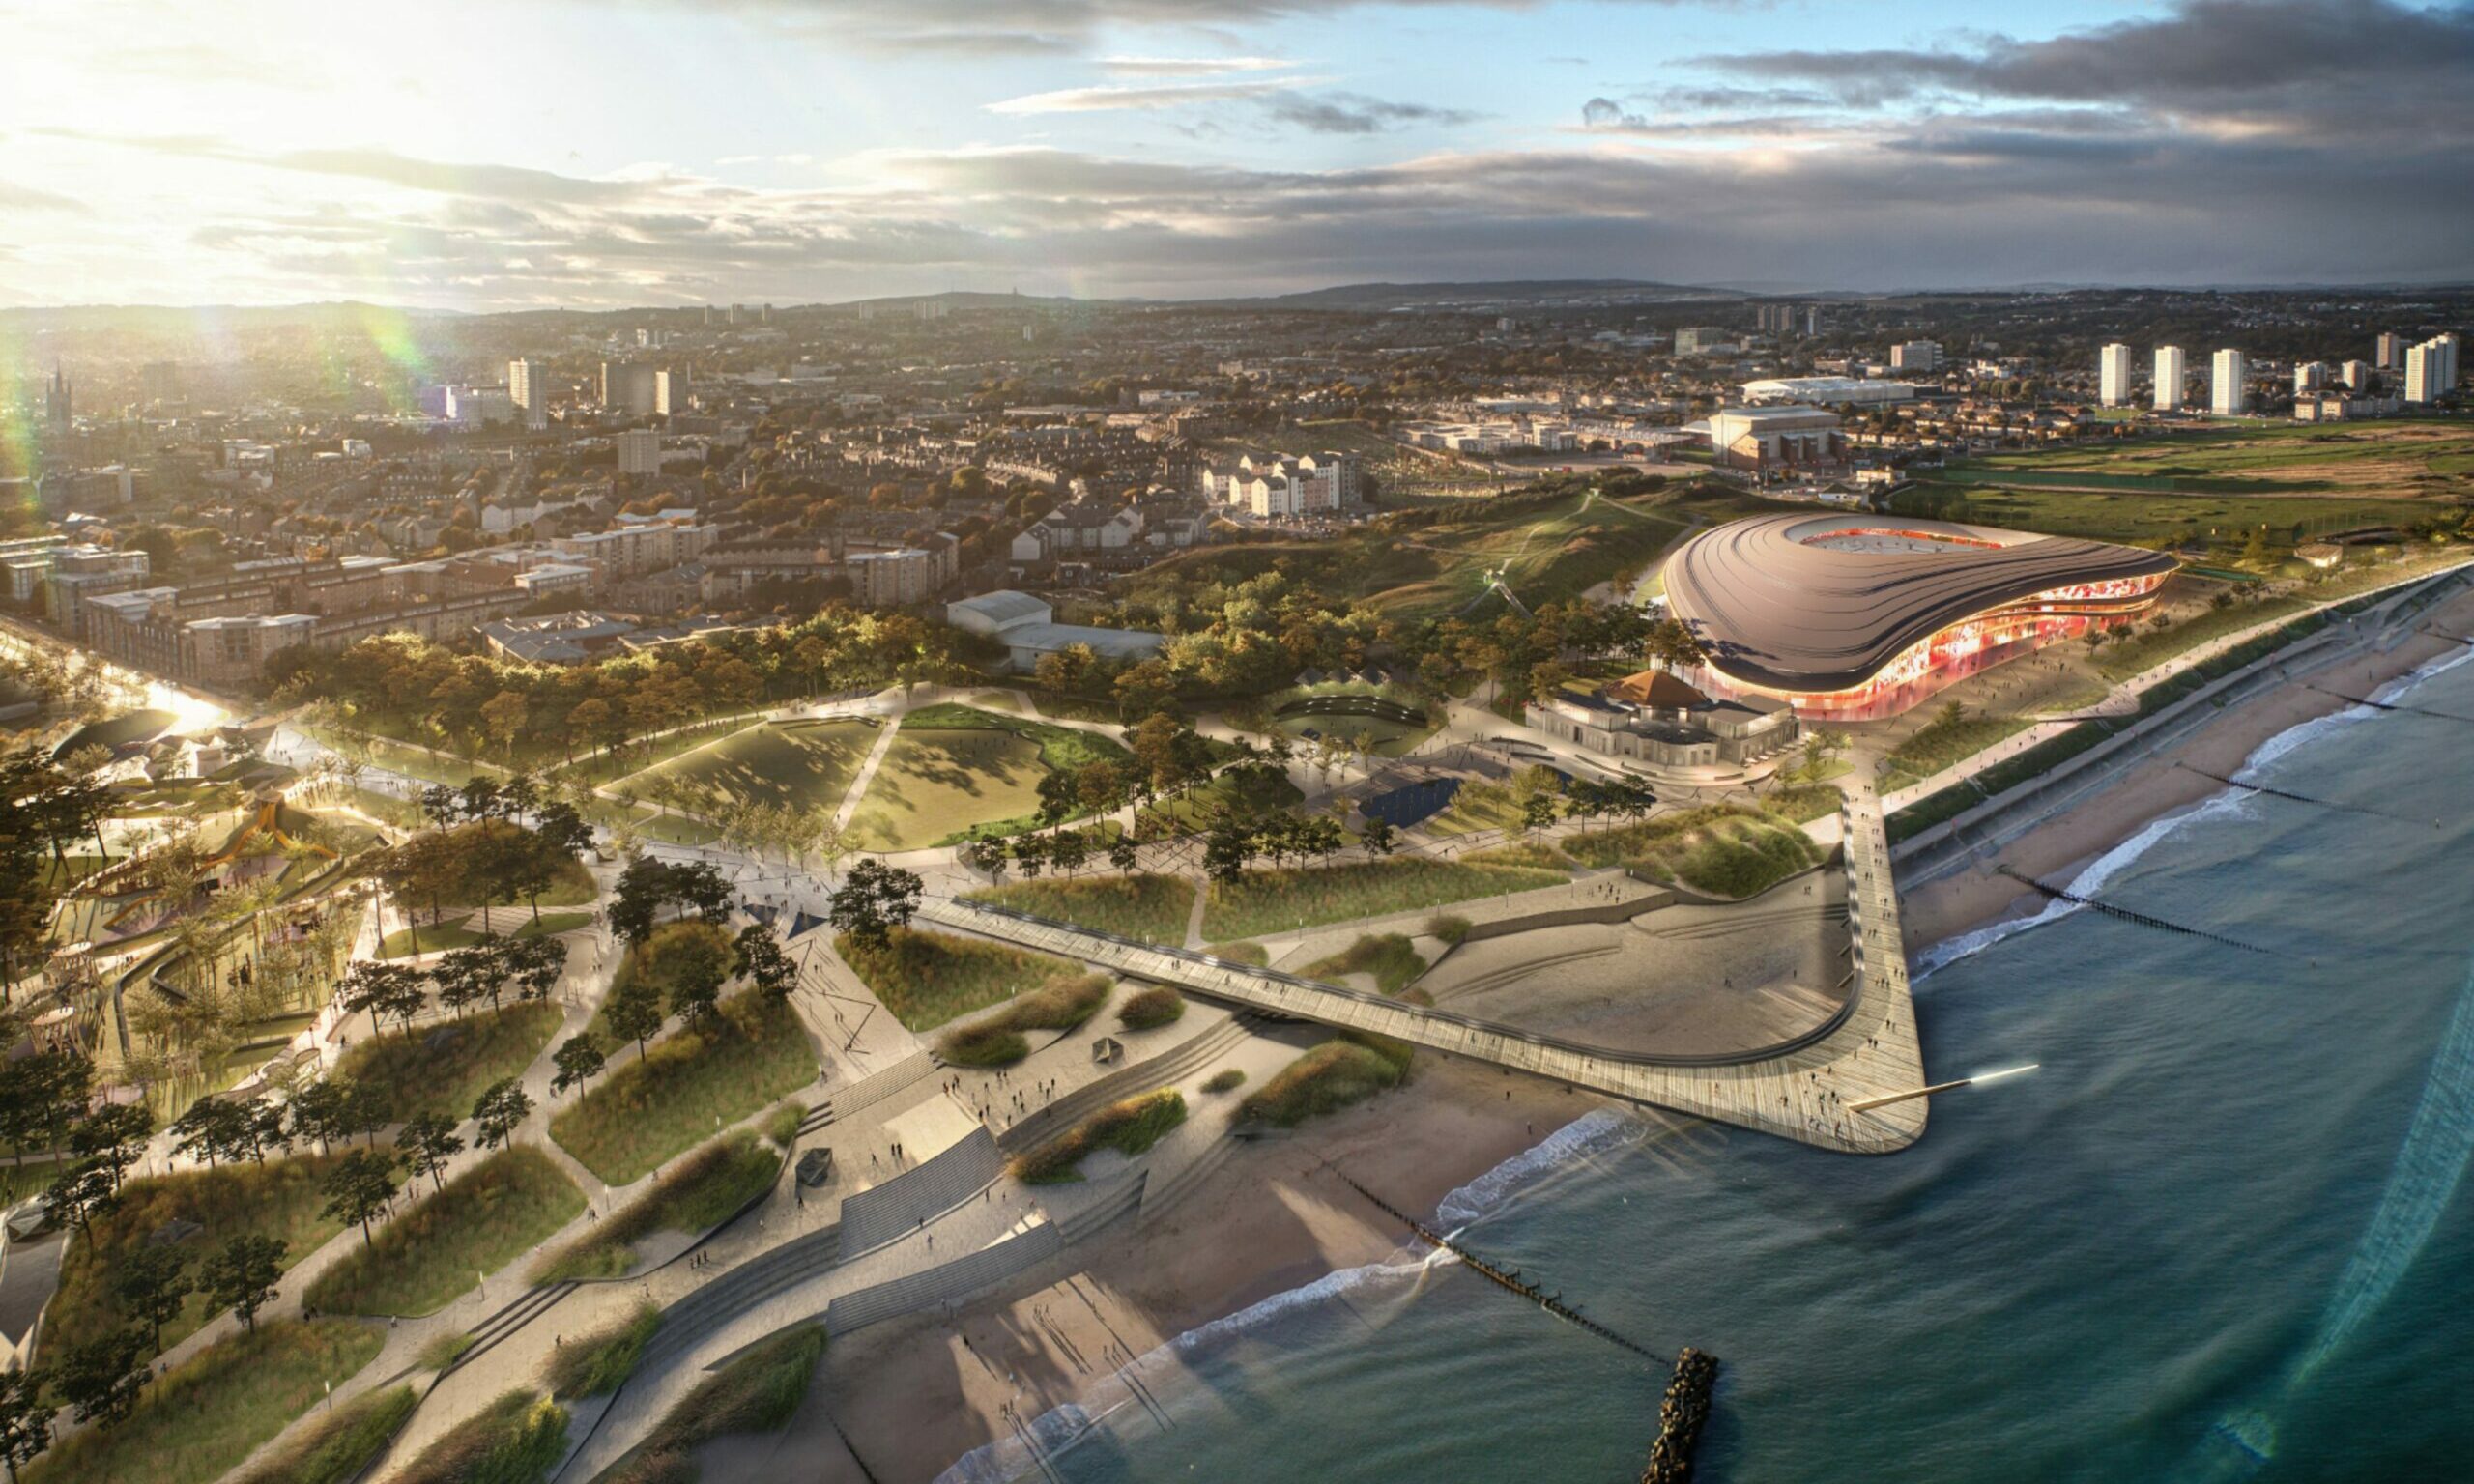 An impression of how a new Aberdeen stadium could sit along the seafront